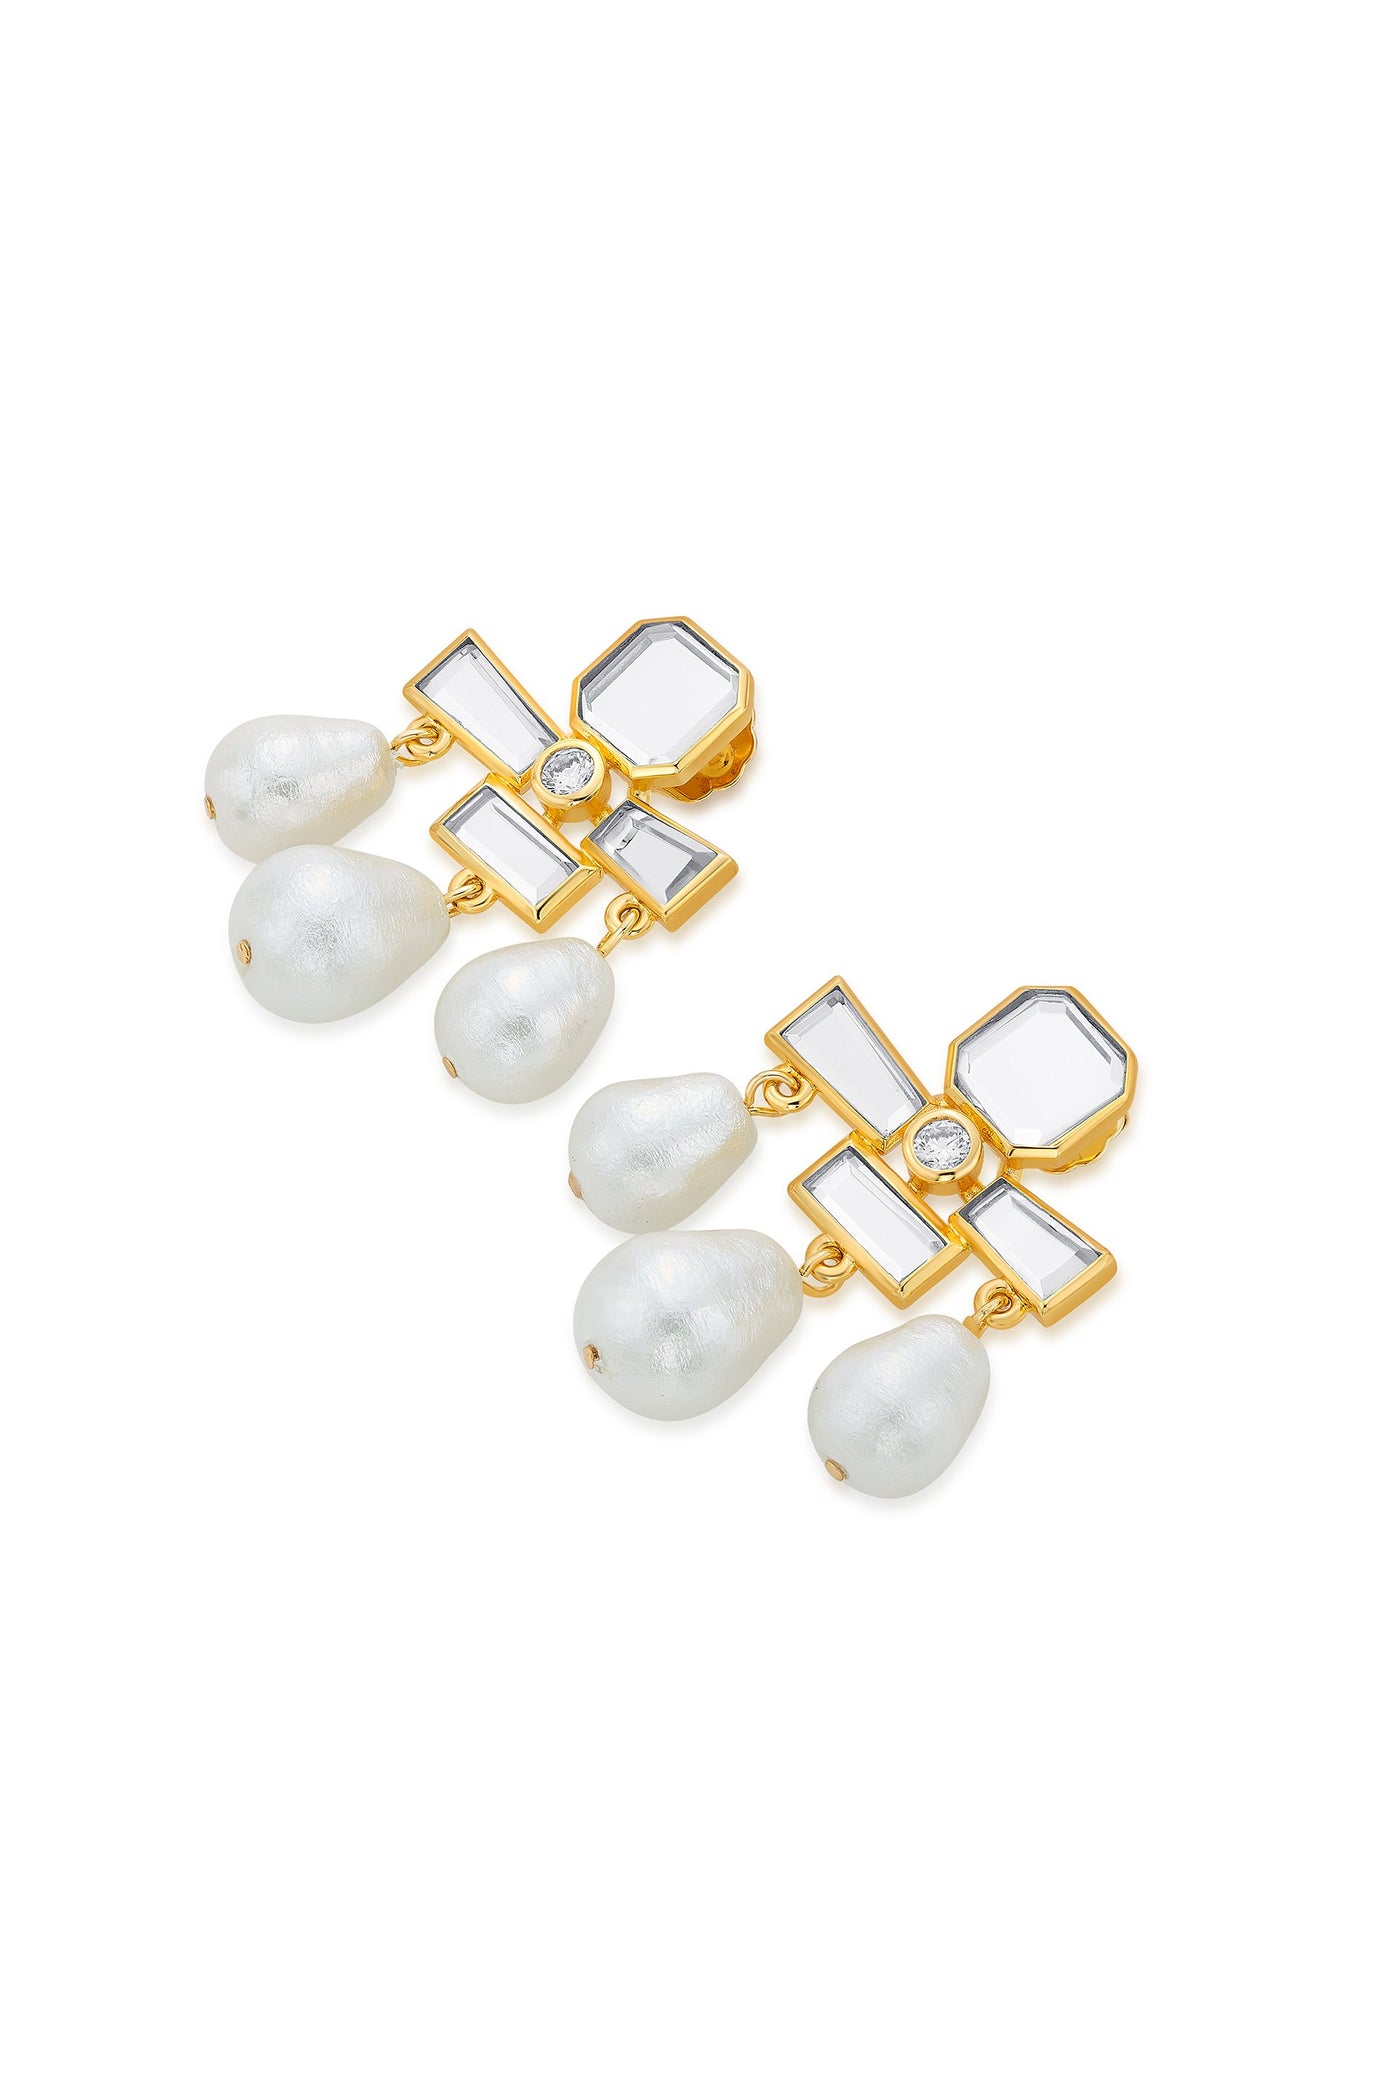 Mirrors on the Move 2.0 Pearl Trio Drop Earrings